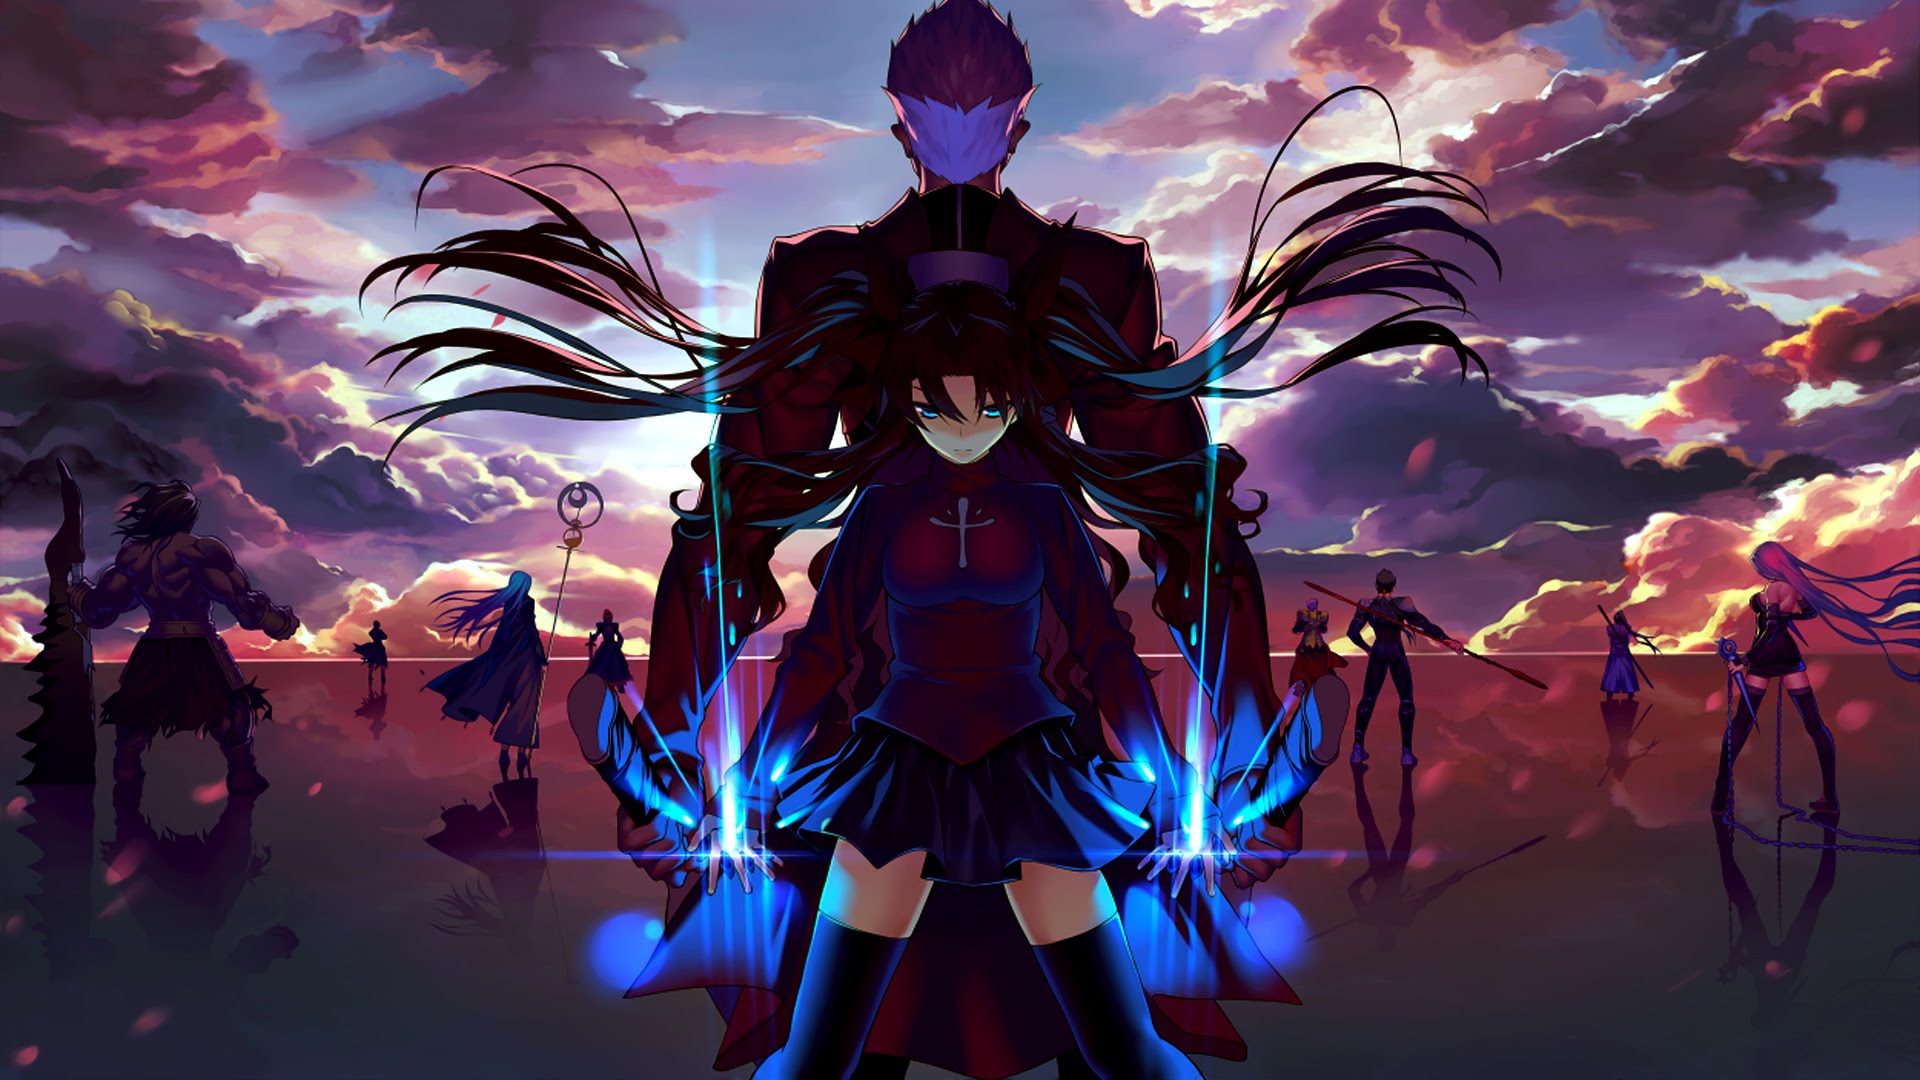 Fate/stay night: Unlimited Blade Works BD Batch Subtitle Indonesia